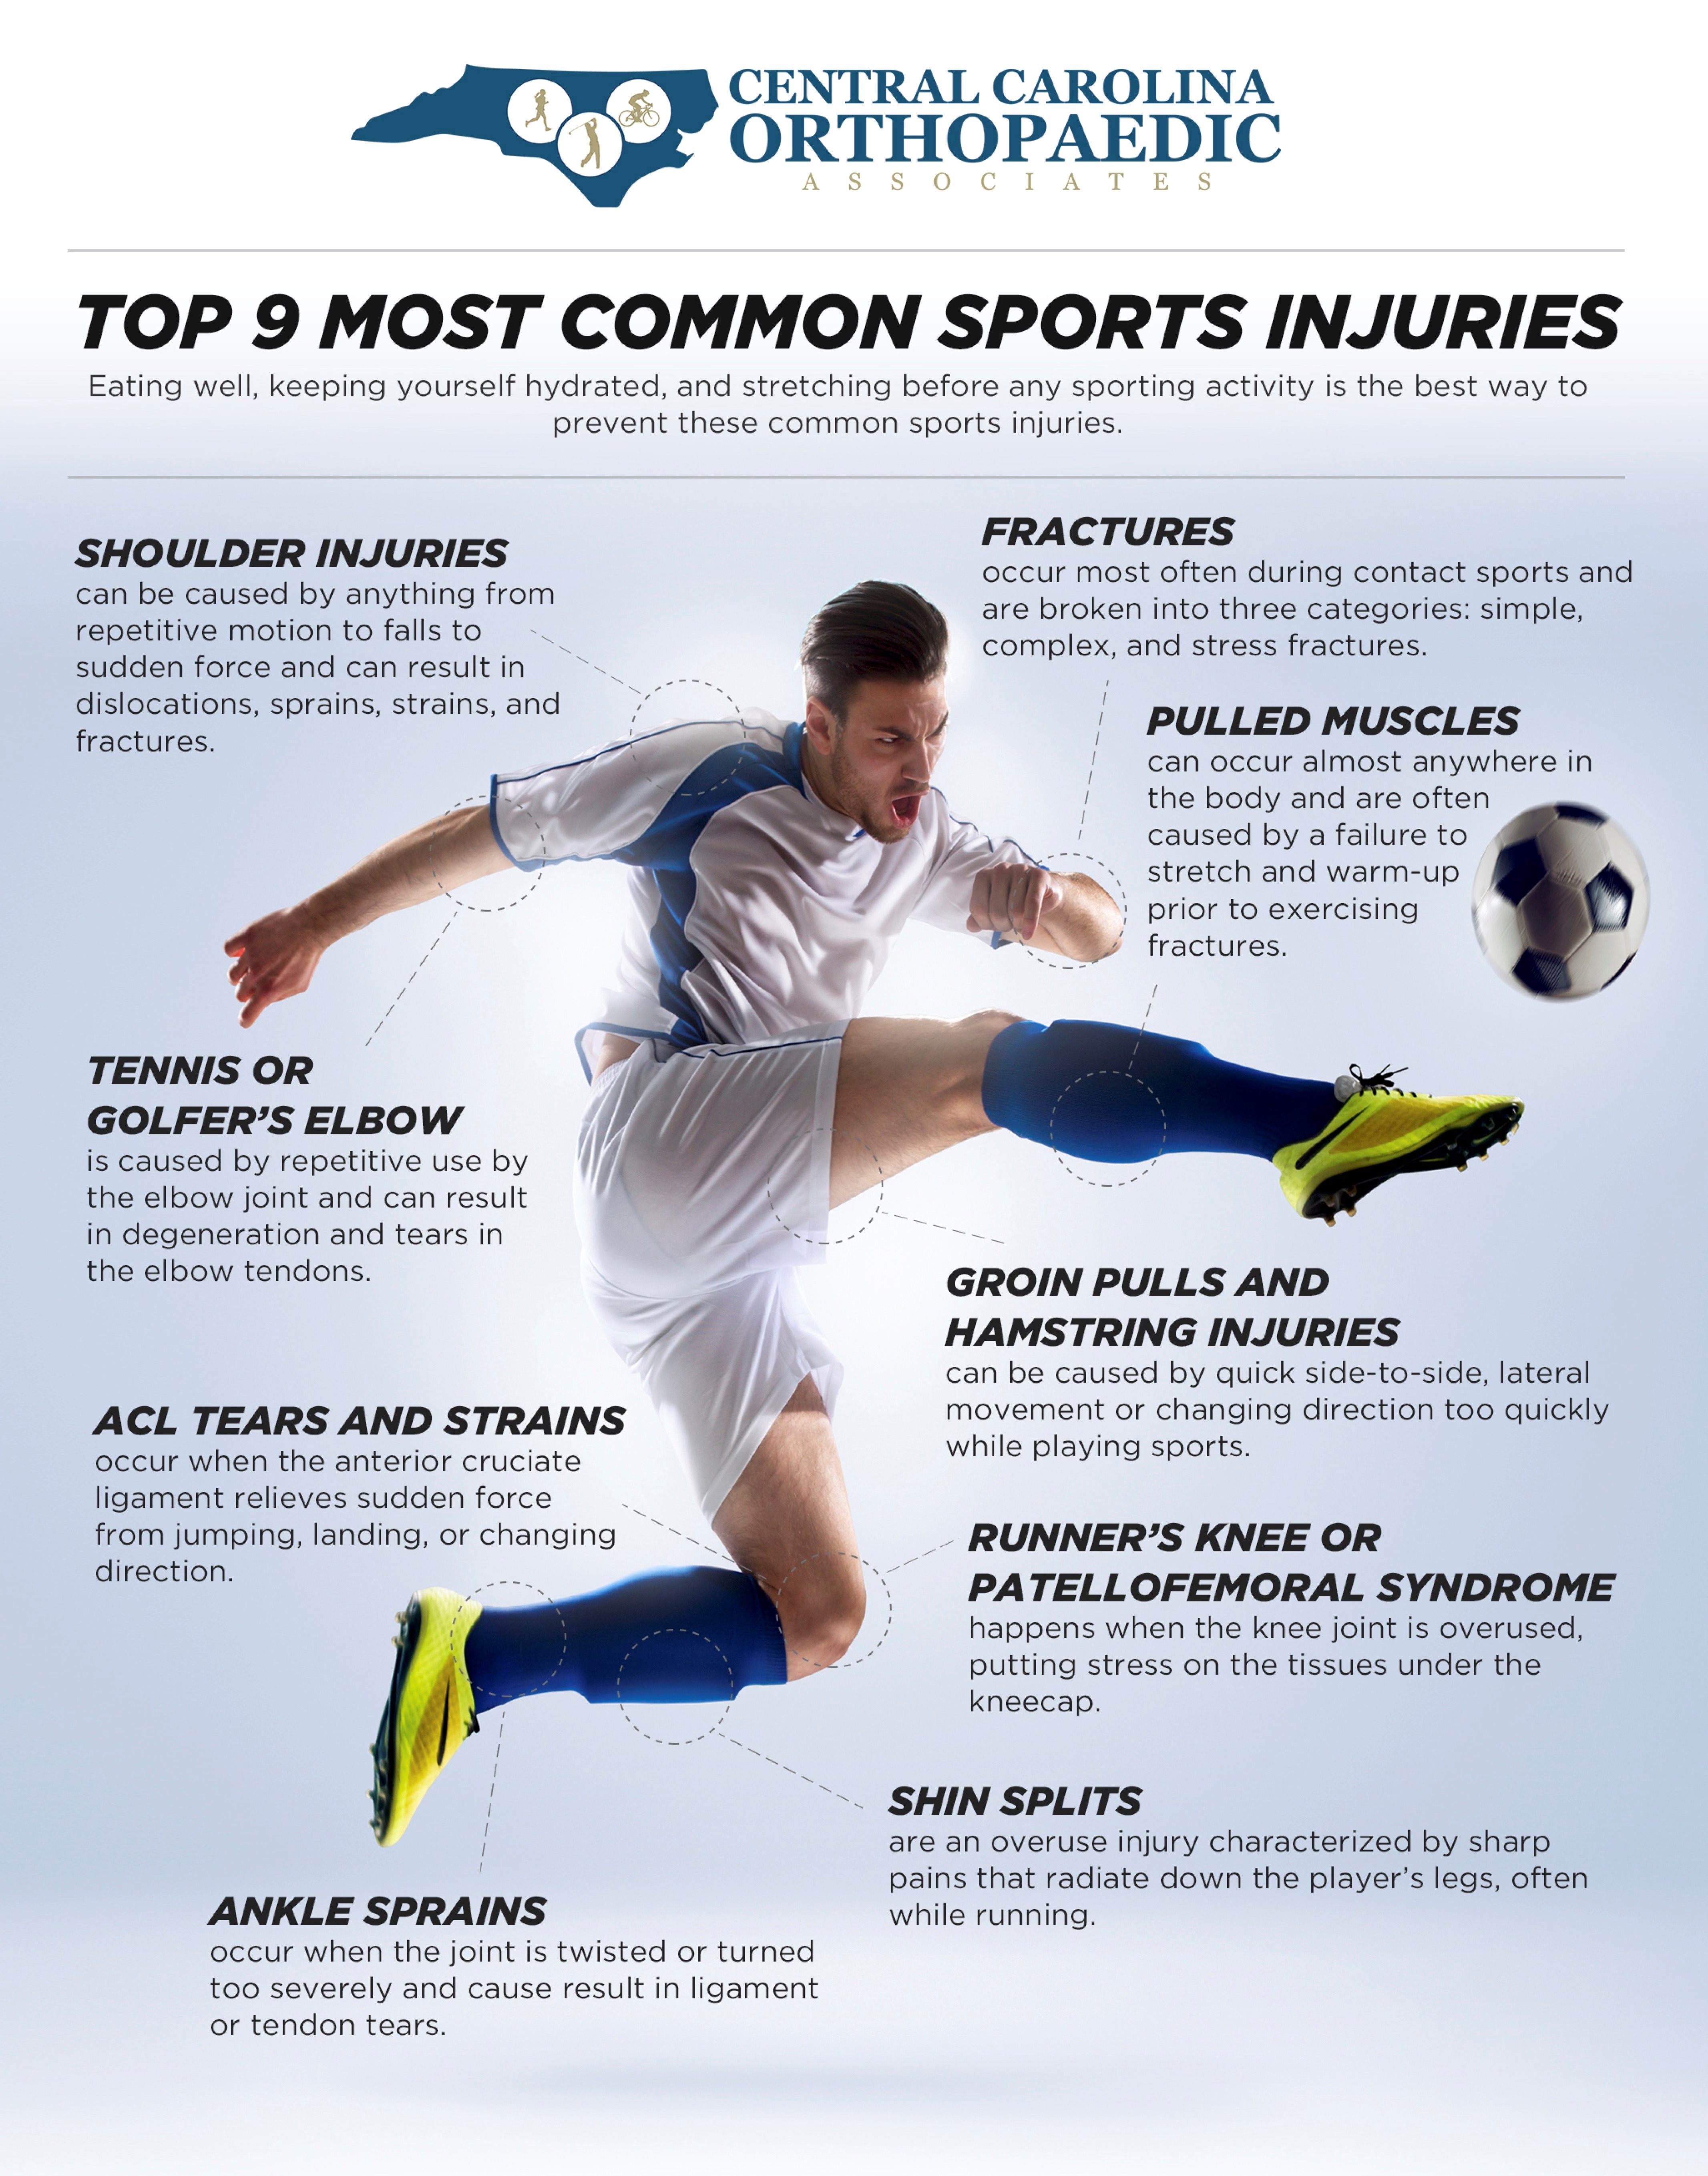 Top 9 Most Common Sports Injuries